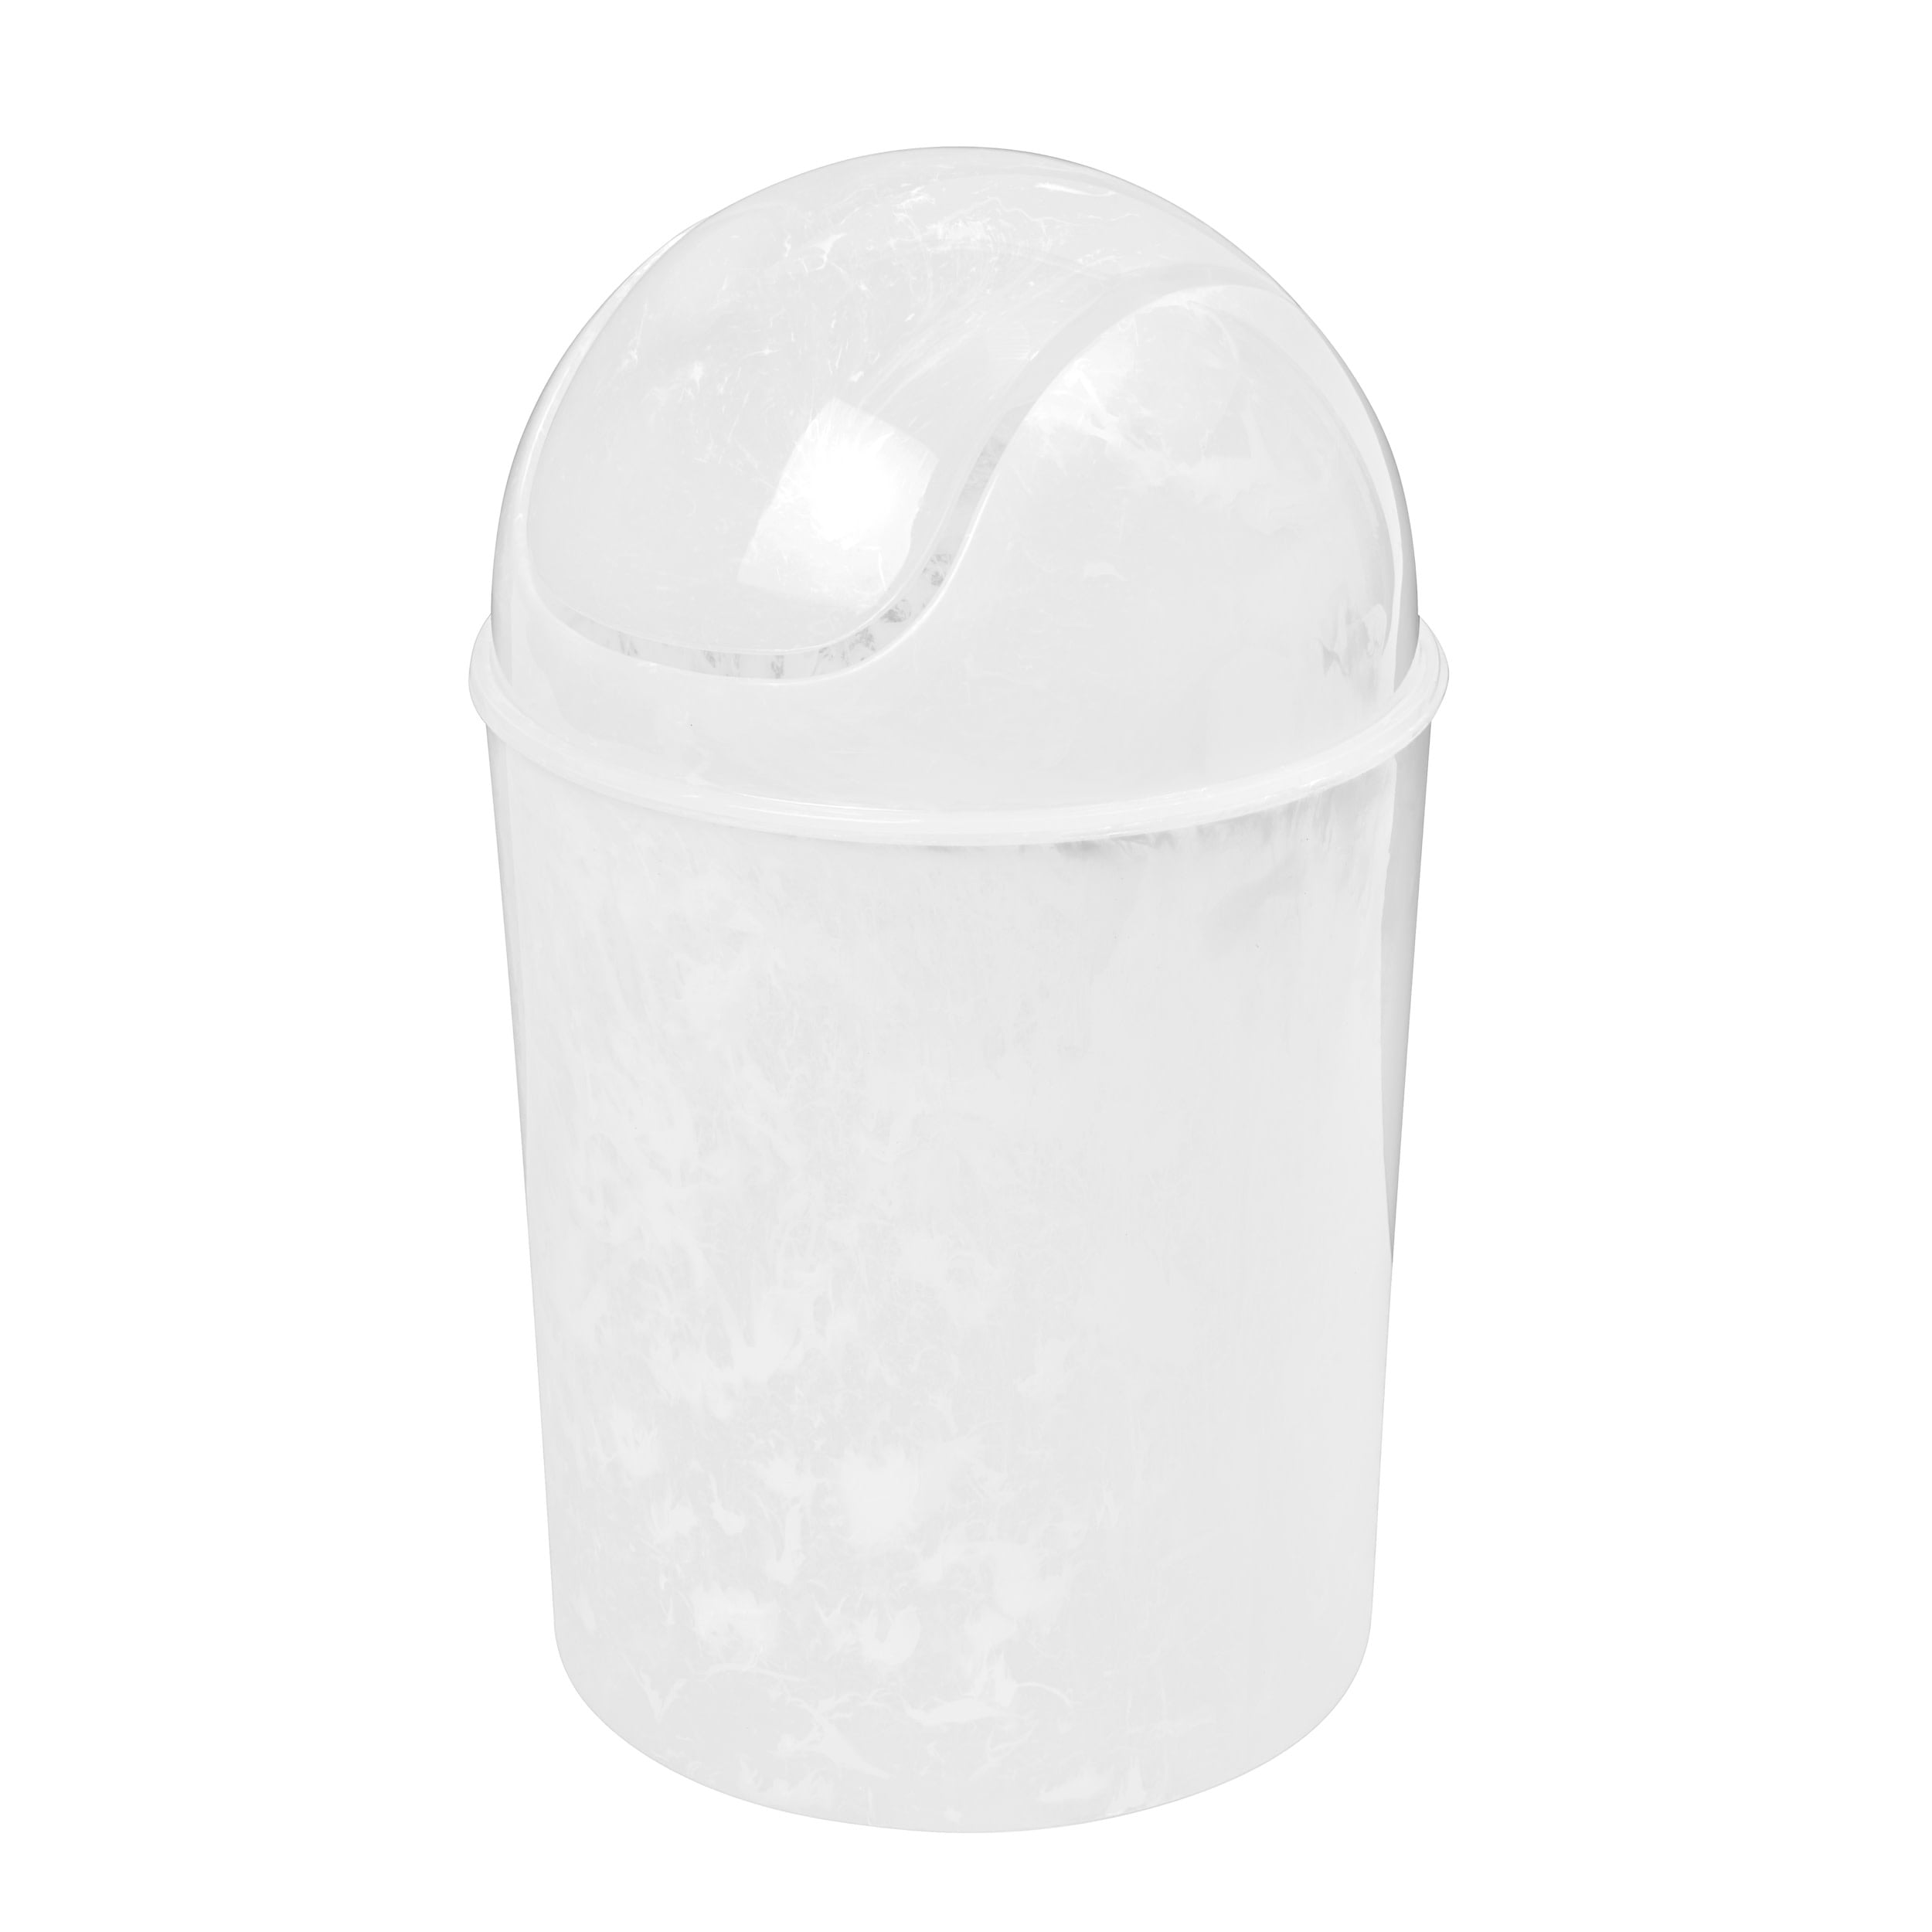 SUPER7 Plastic 45 Litre Touch Top Kitchen Bin With Removable Lid Rectangular,